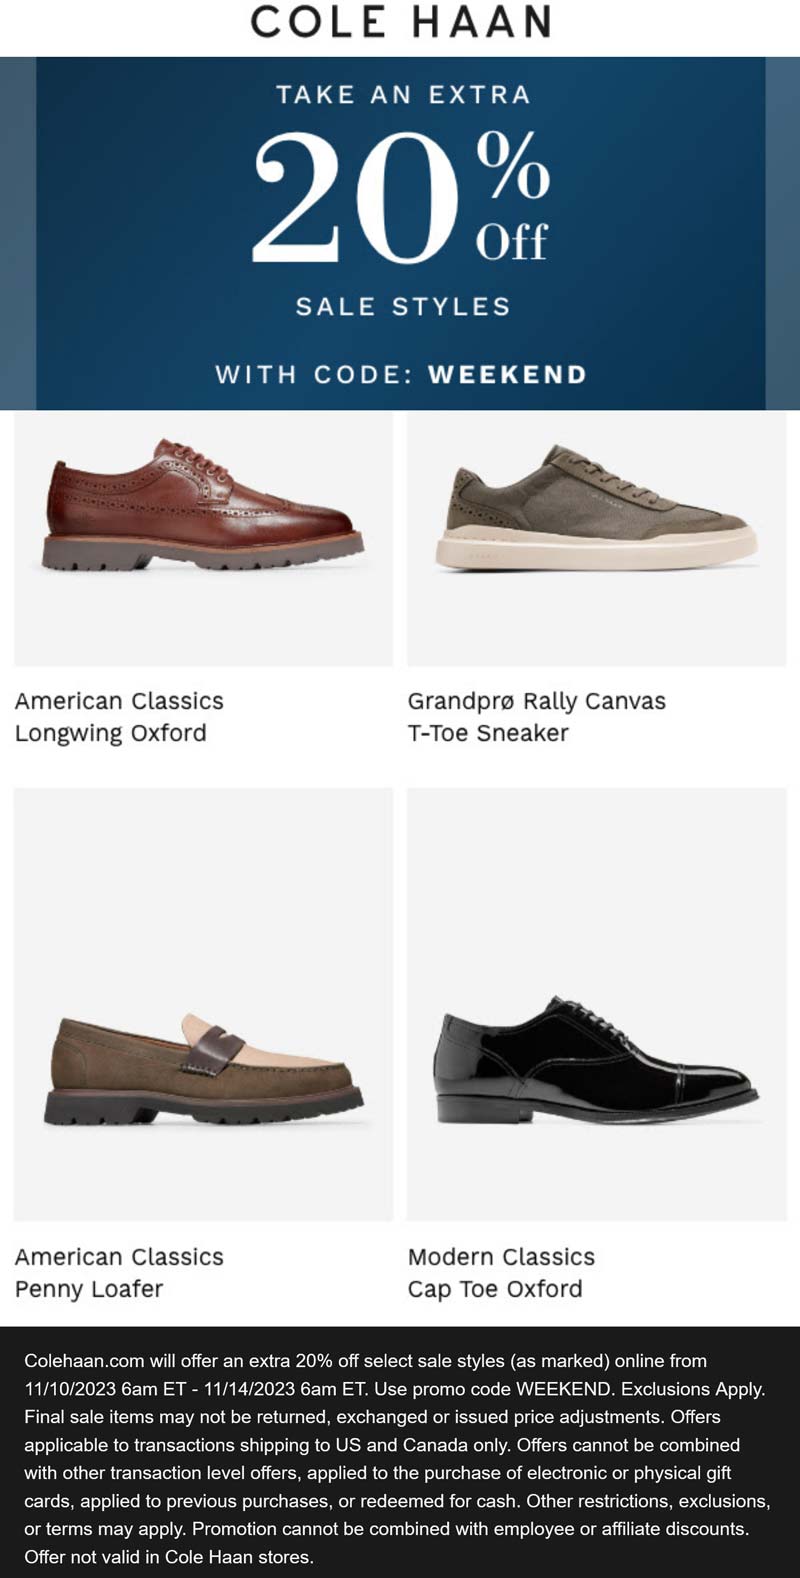 Extra 20% off sale styles today at Cole Haan via promo code WEEKEND #colehaan